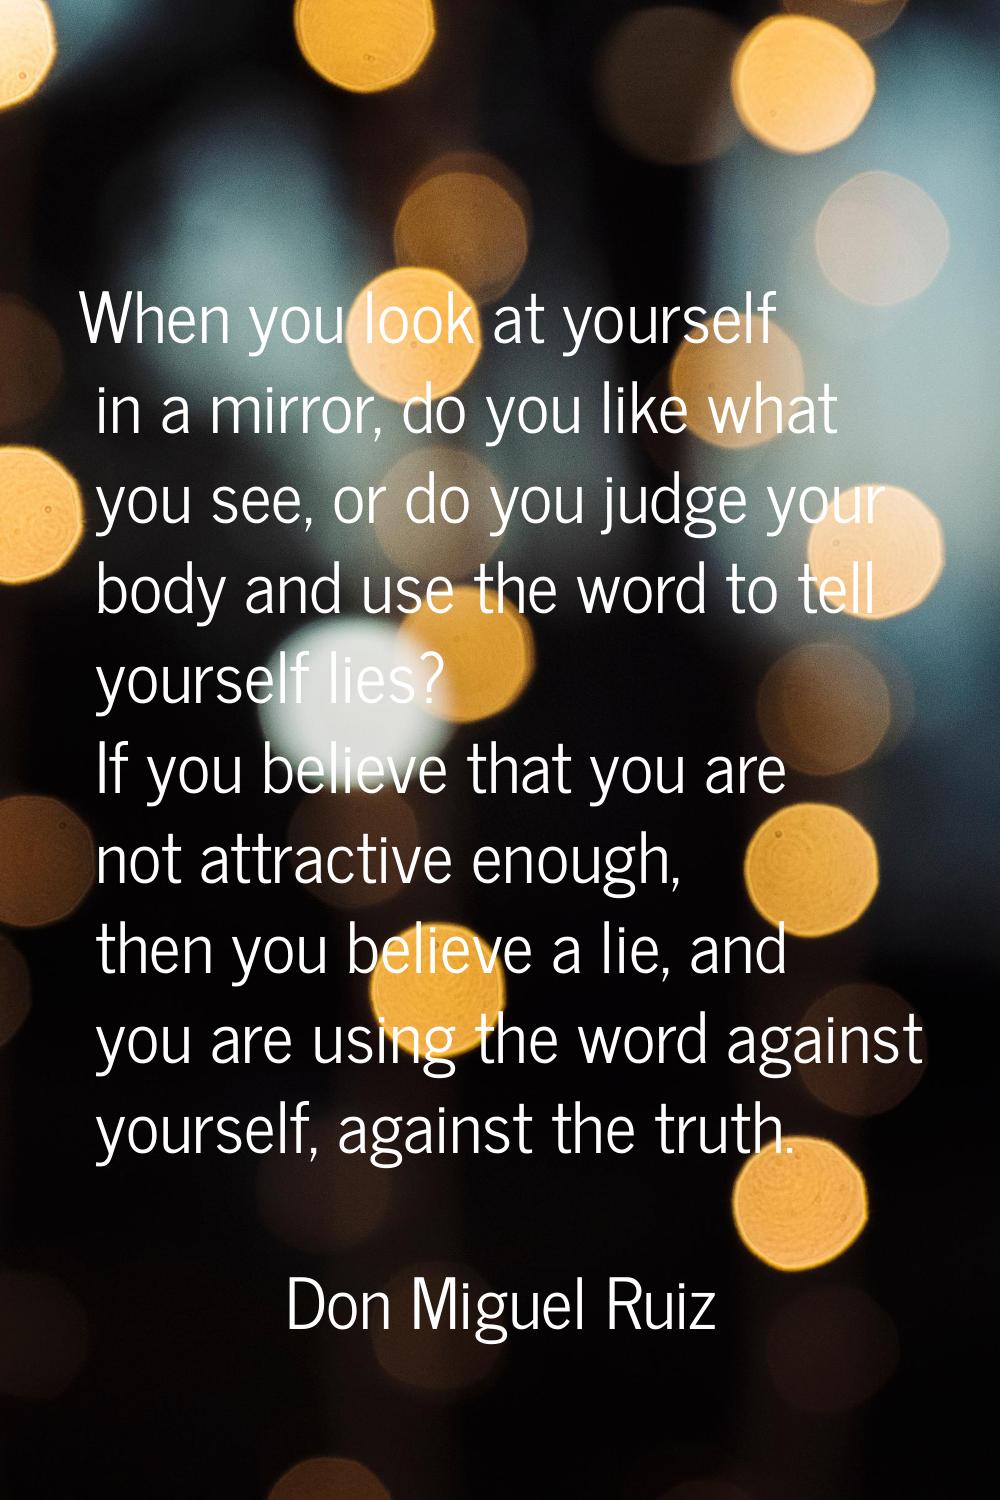 When you look at yourself in a mirror, do you like what you see, or do you judge your body and use 